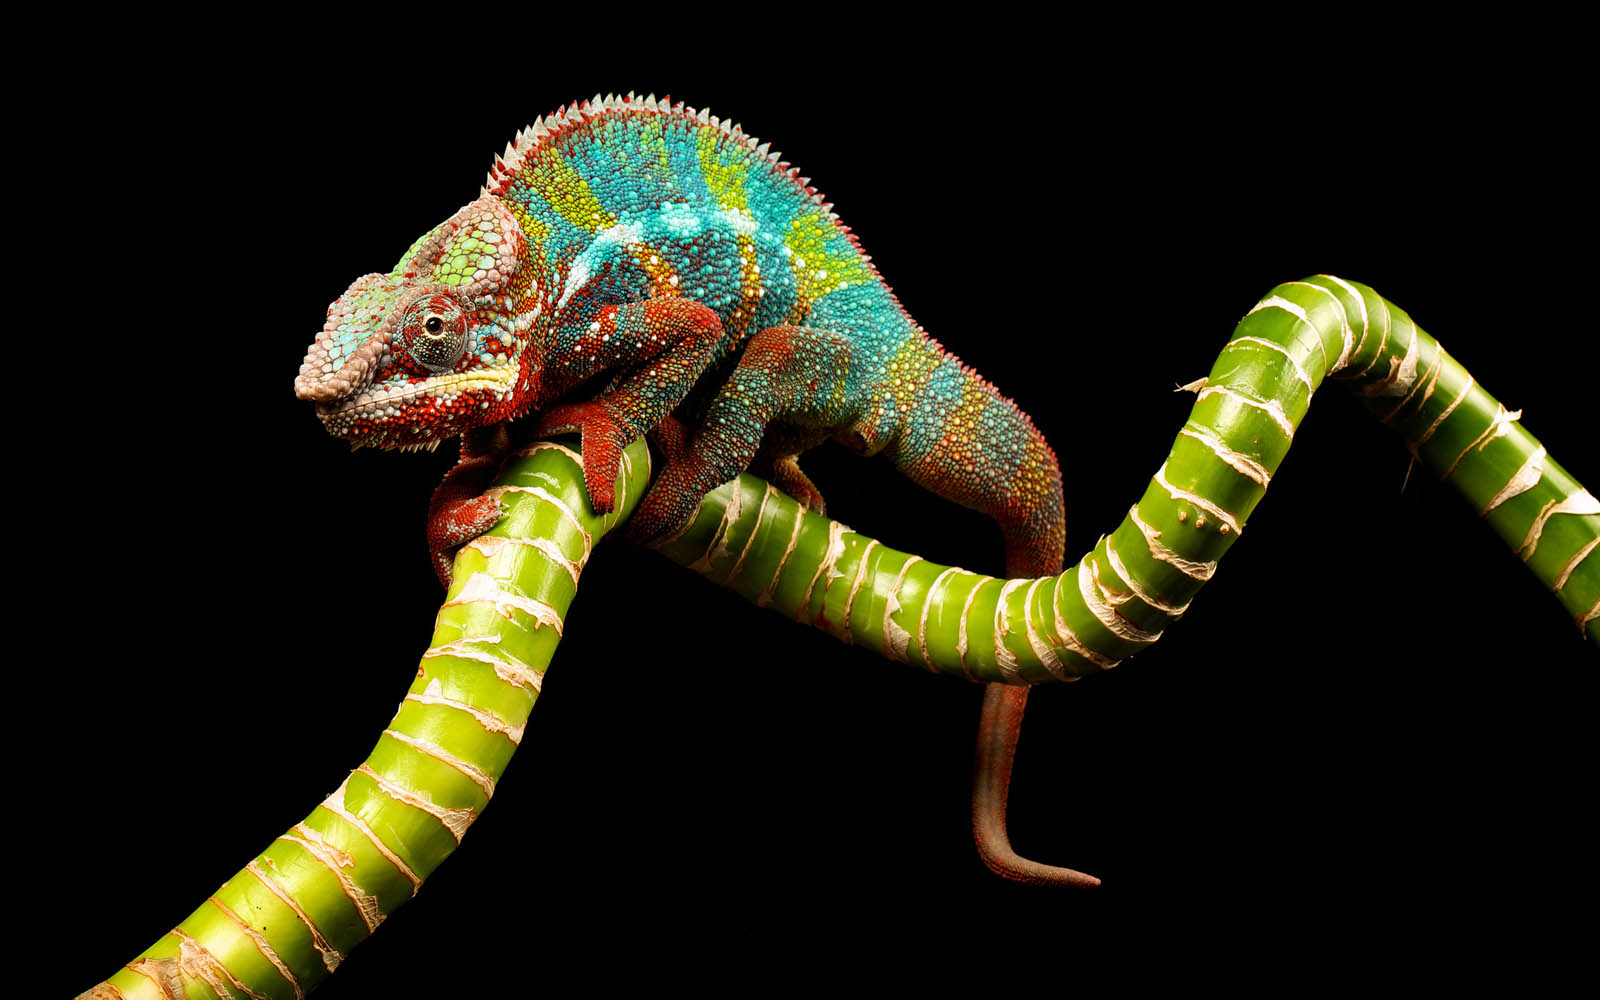 Tag Chameleon Wallpaper Background Photos Image And Pictures For